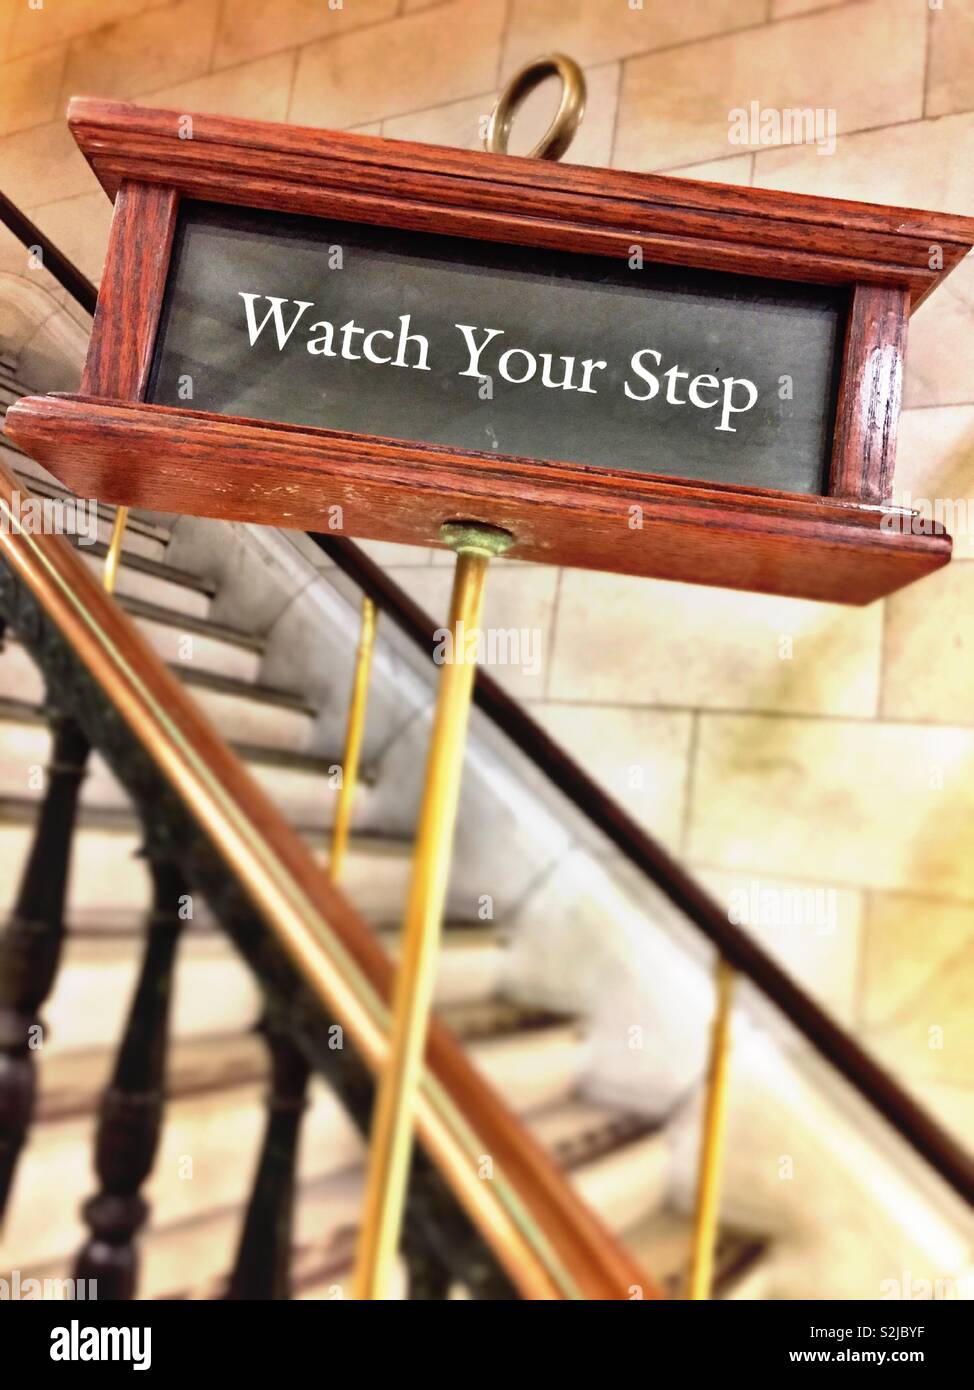 Elegant wooden and brass watch your step warning sign on a flight of interior stairs, USA Stock Photo